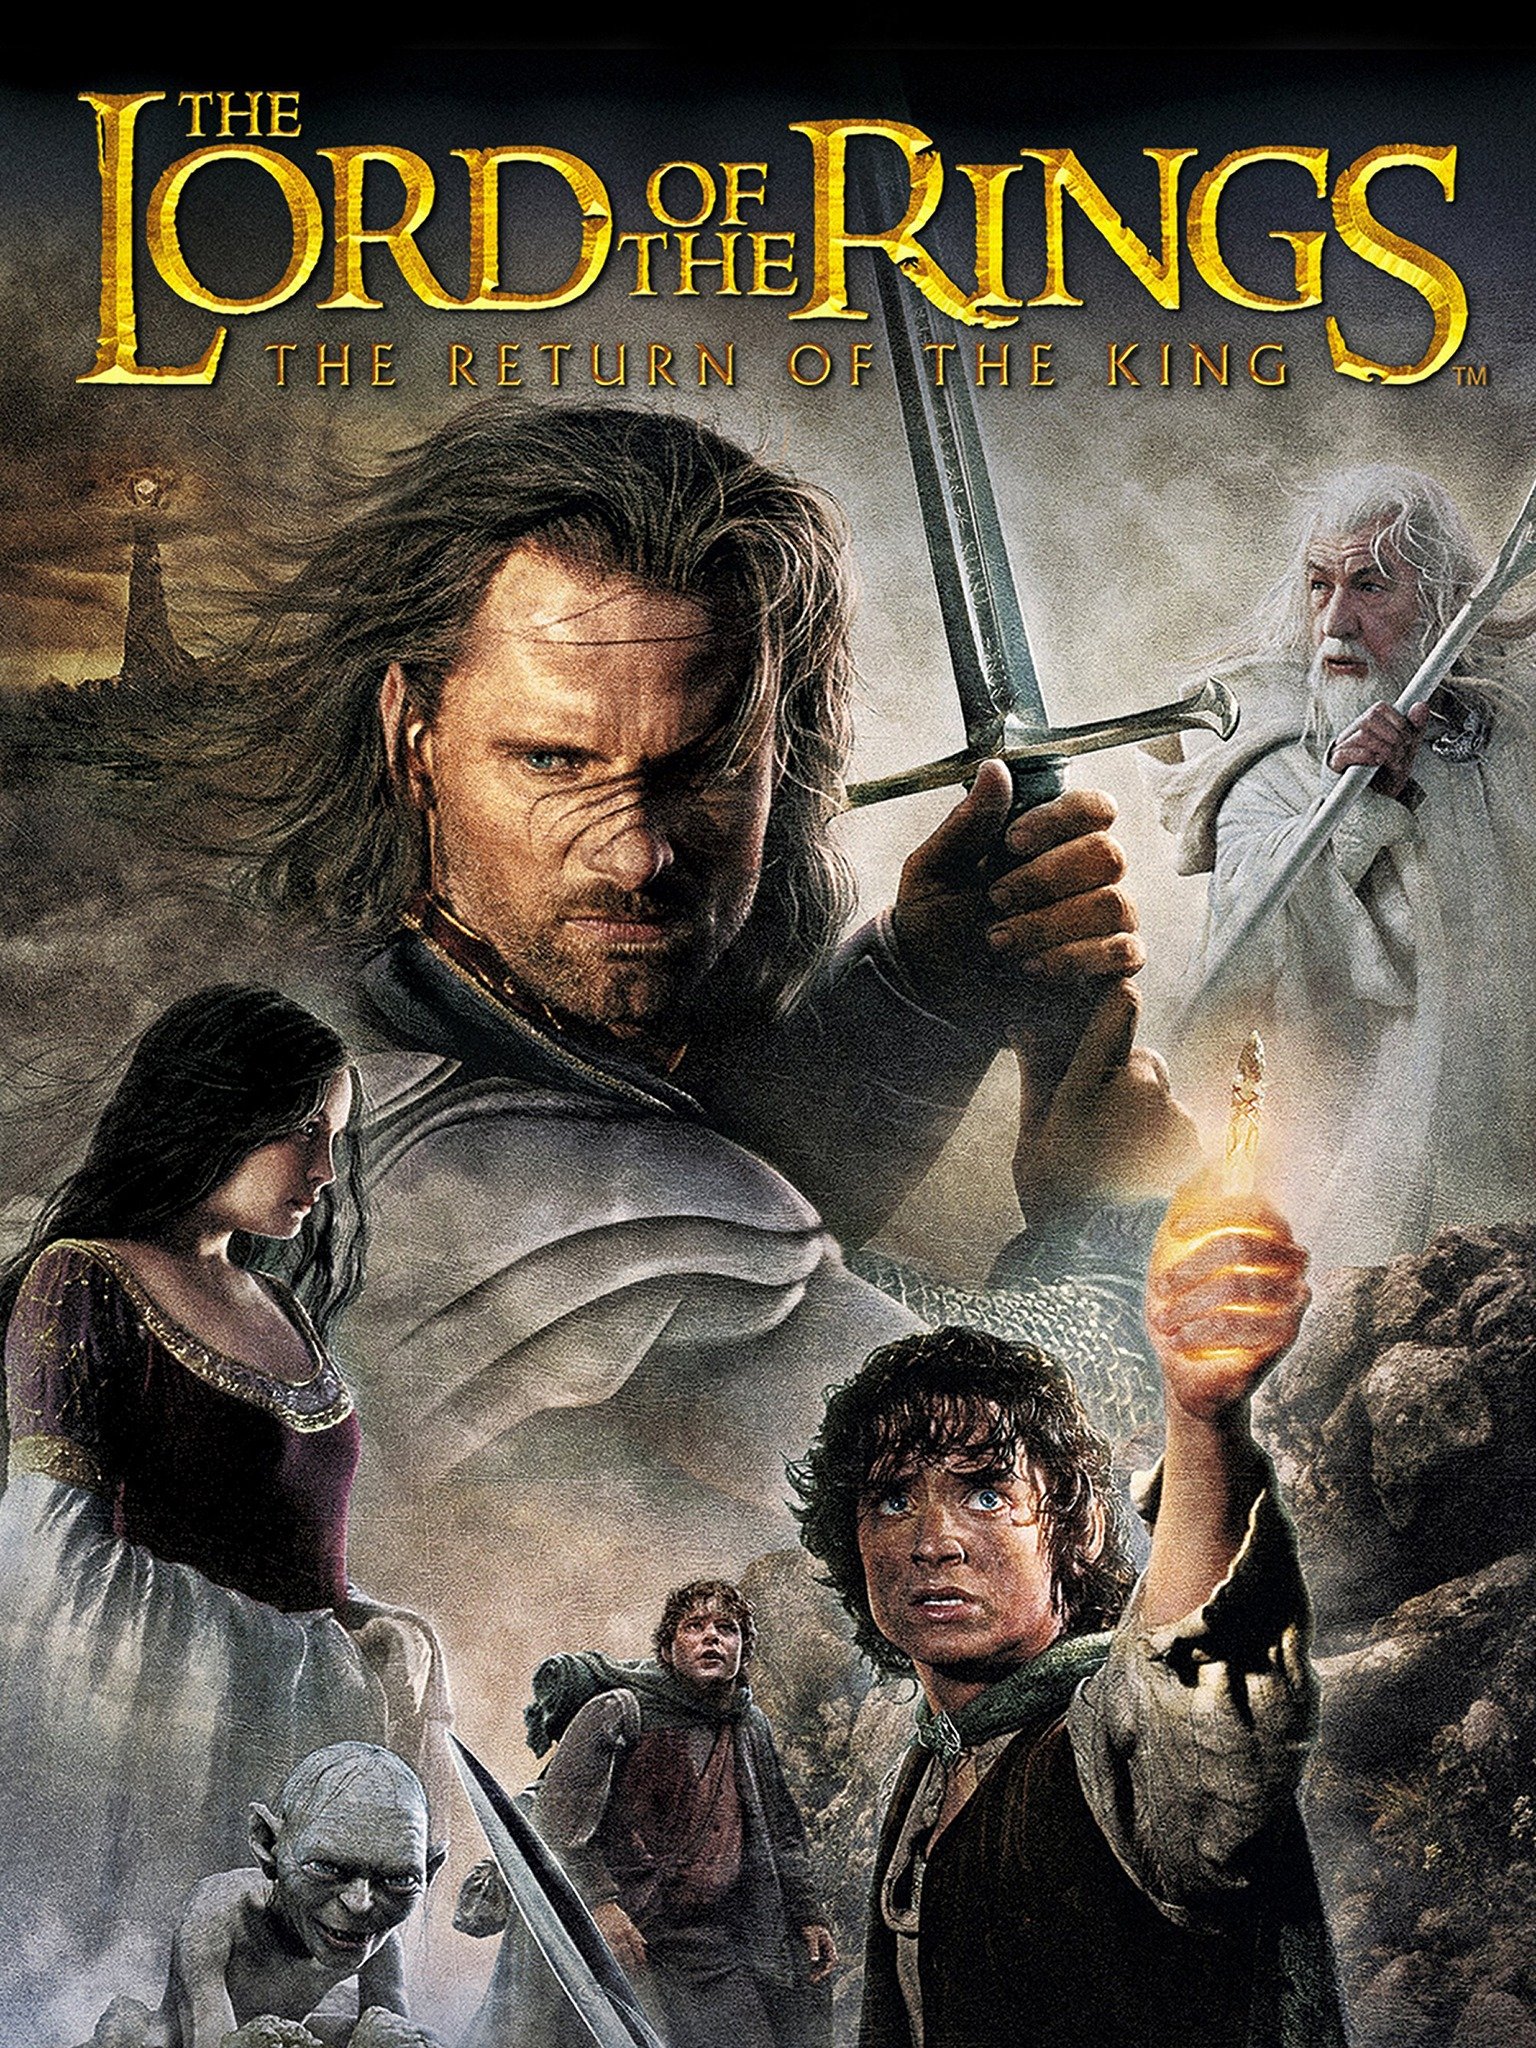 the-lord-of-the-rings-the-return-of-the-king-extended-edition-2003.jpg